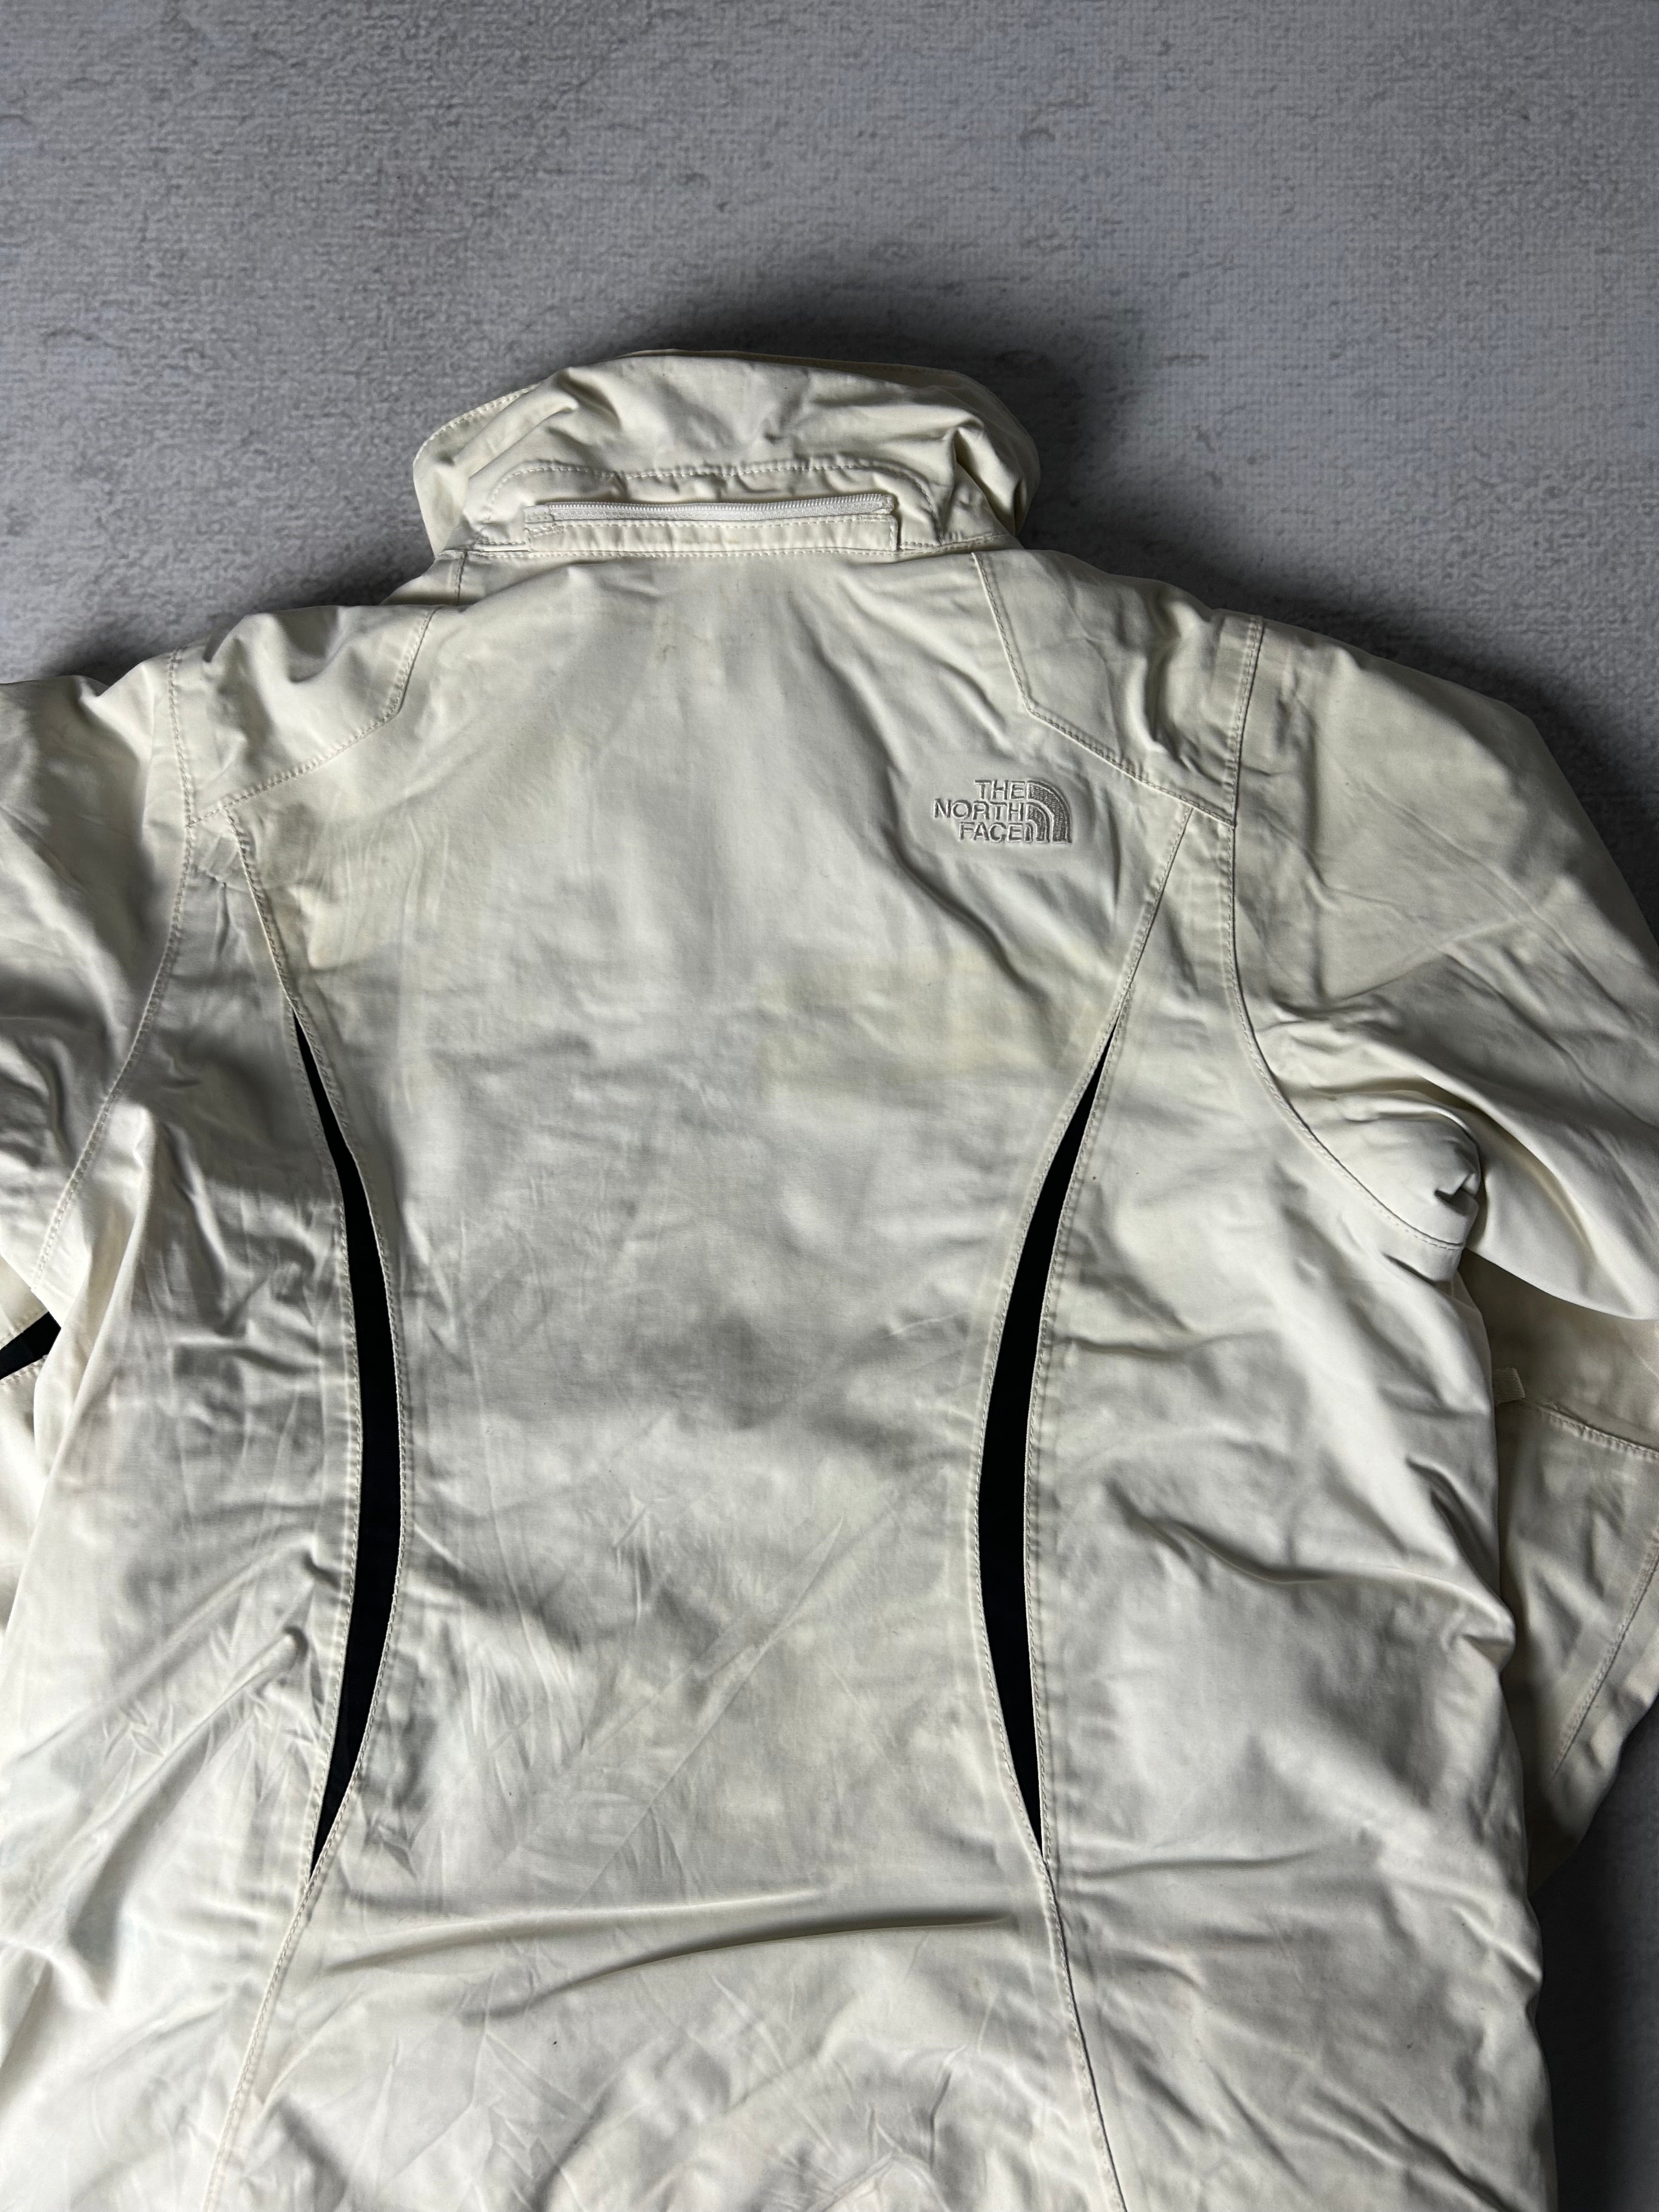 Vintage The North Face HyVent Insulated Jacket - Women's XS